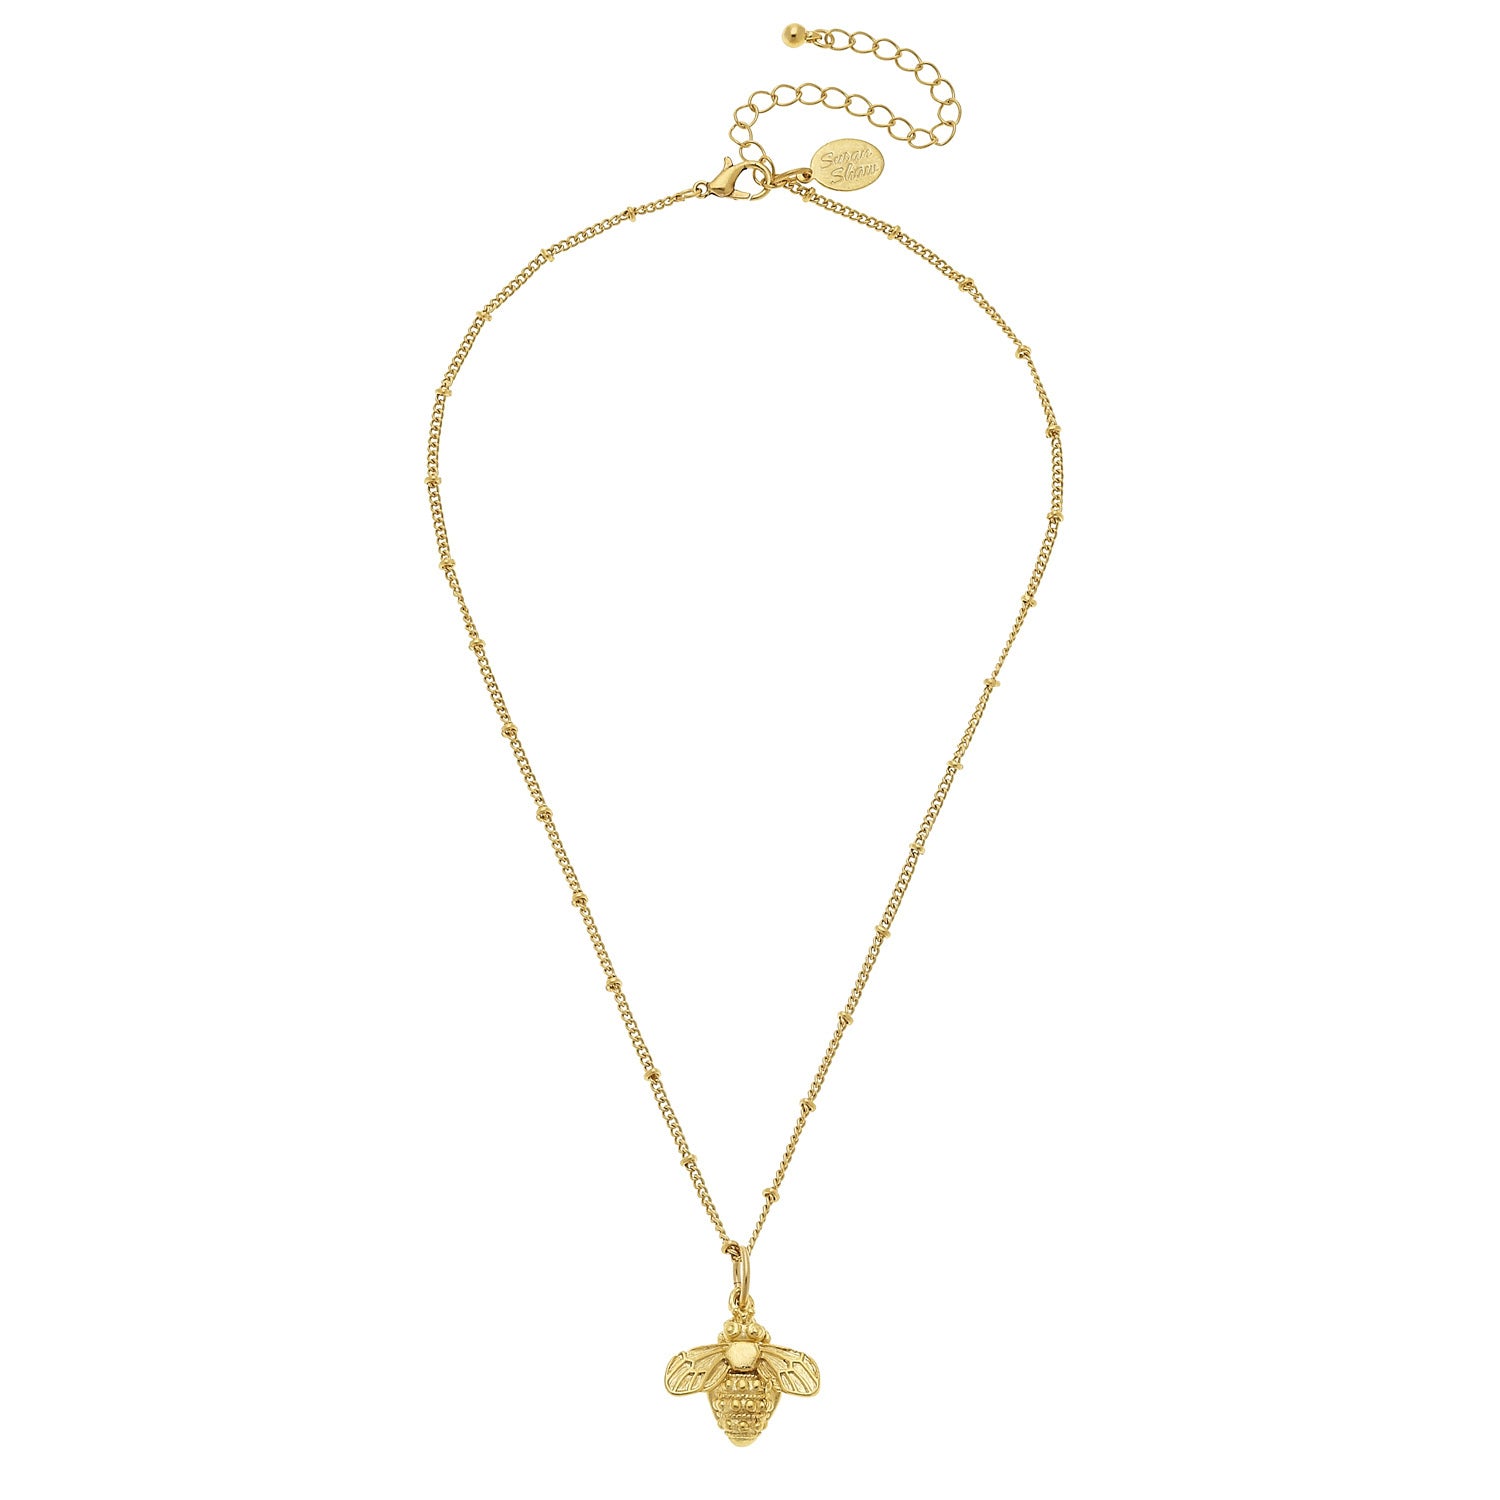 Susan Shaw Bee Chain Necklace, Gold Plated Pendant, 16+3"